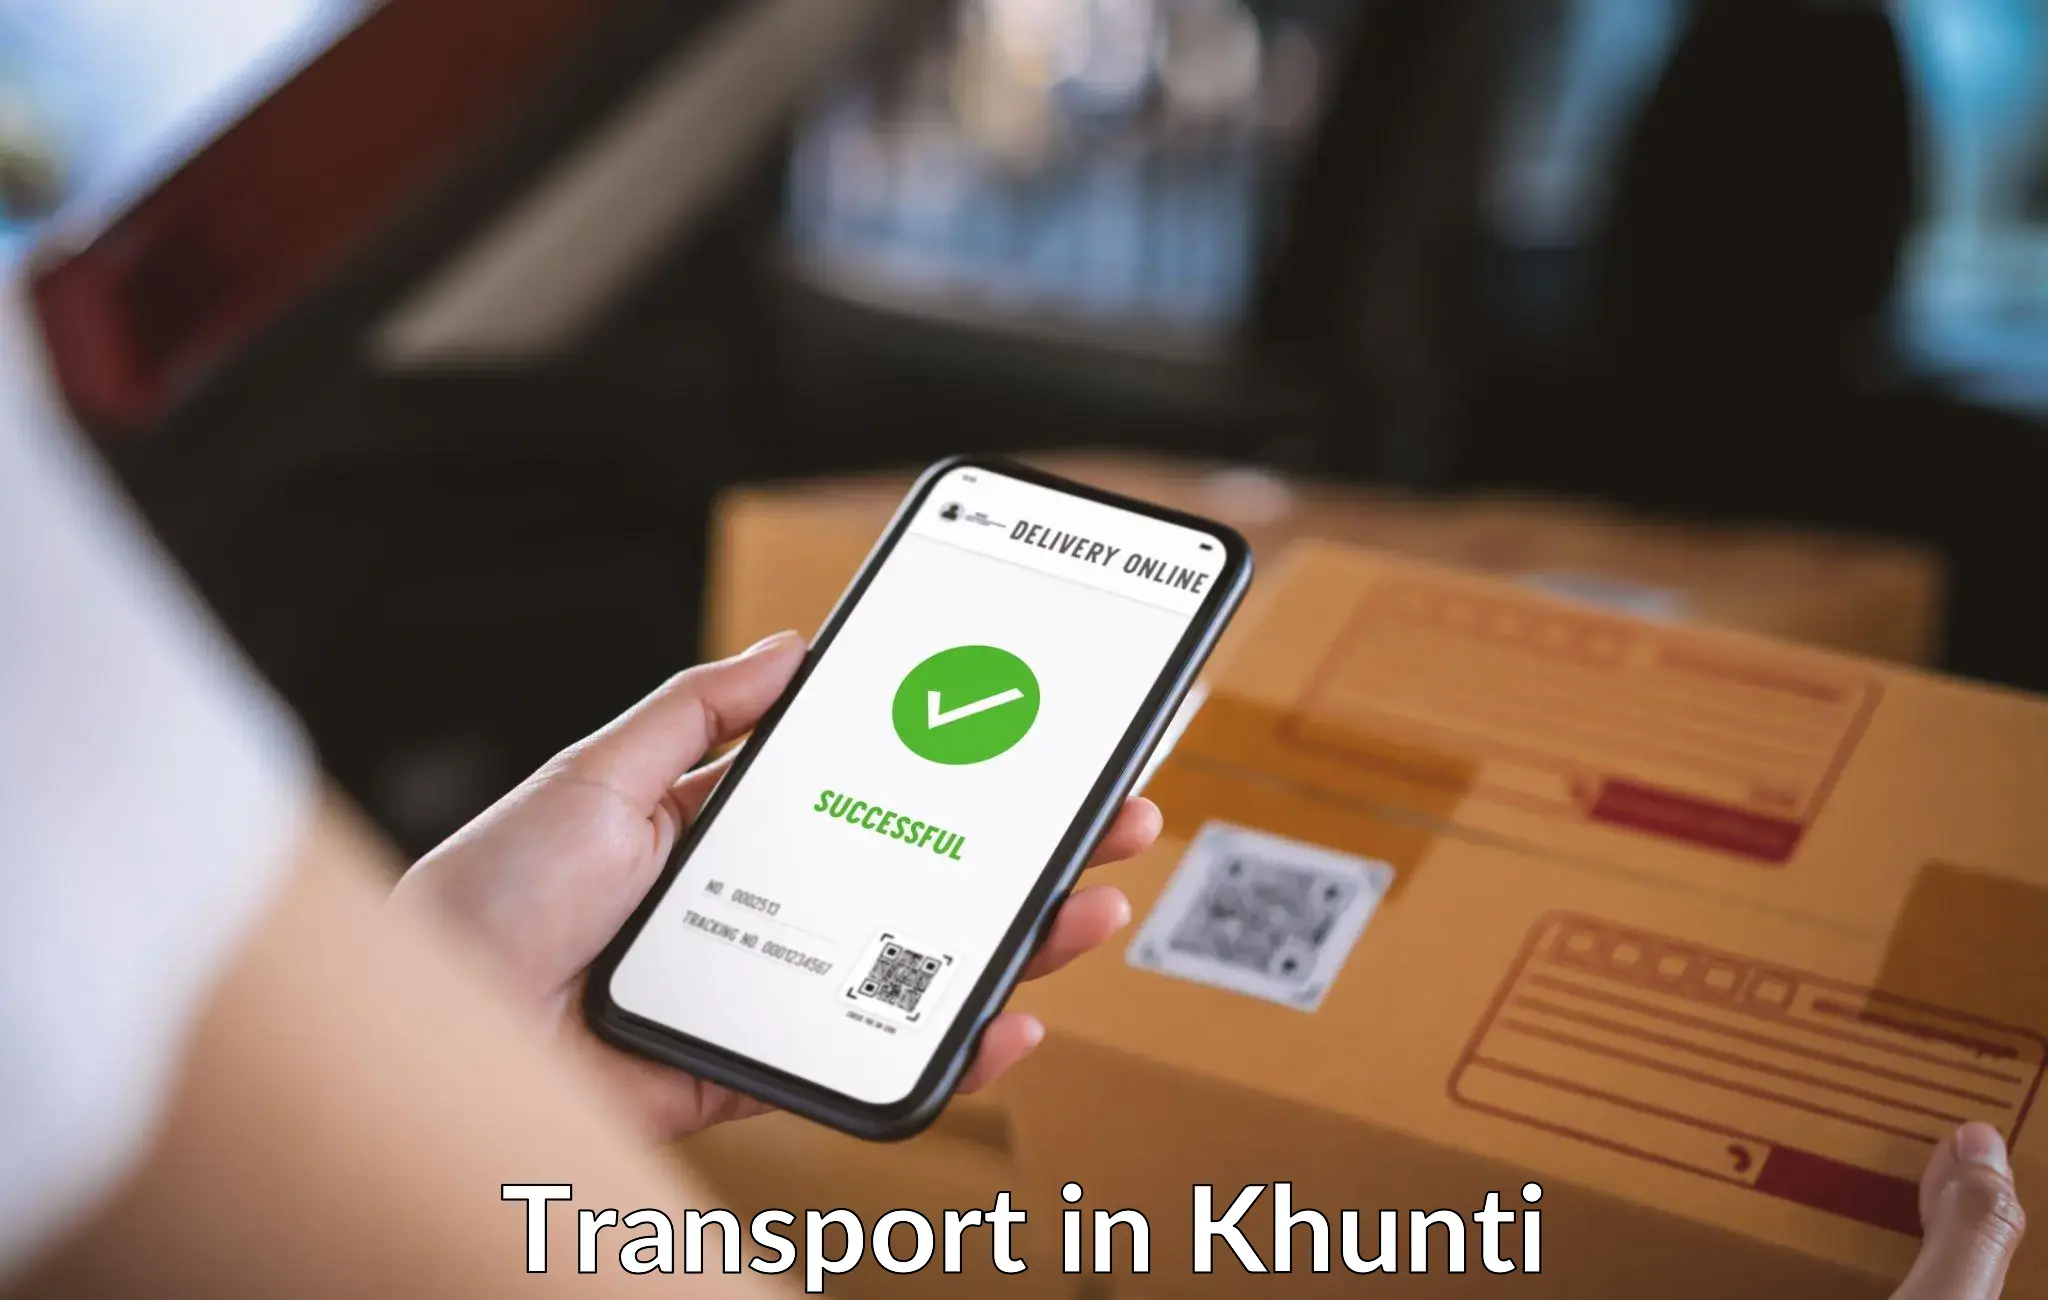 Road transport online services in Khunti